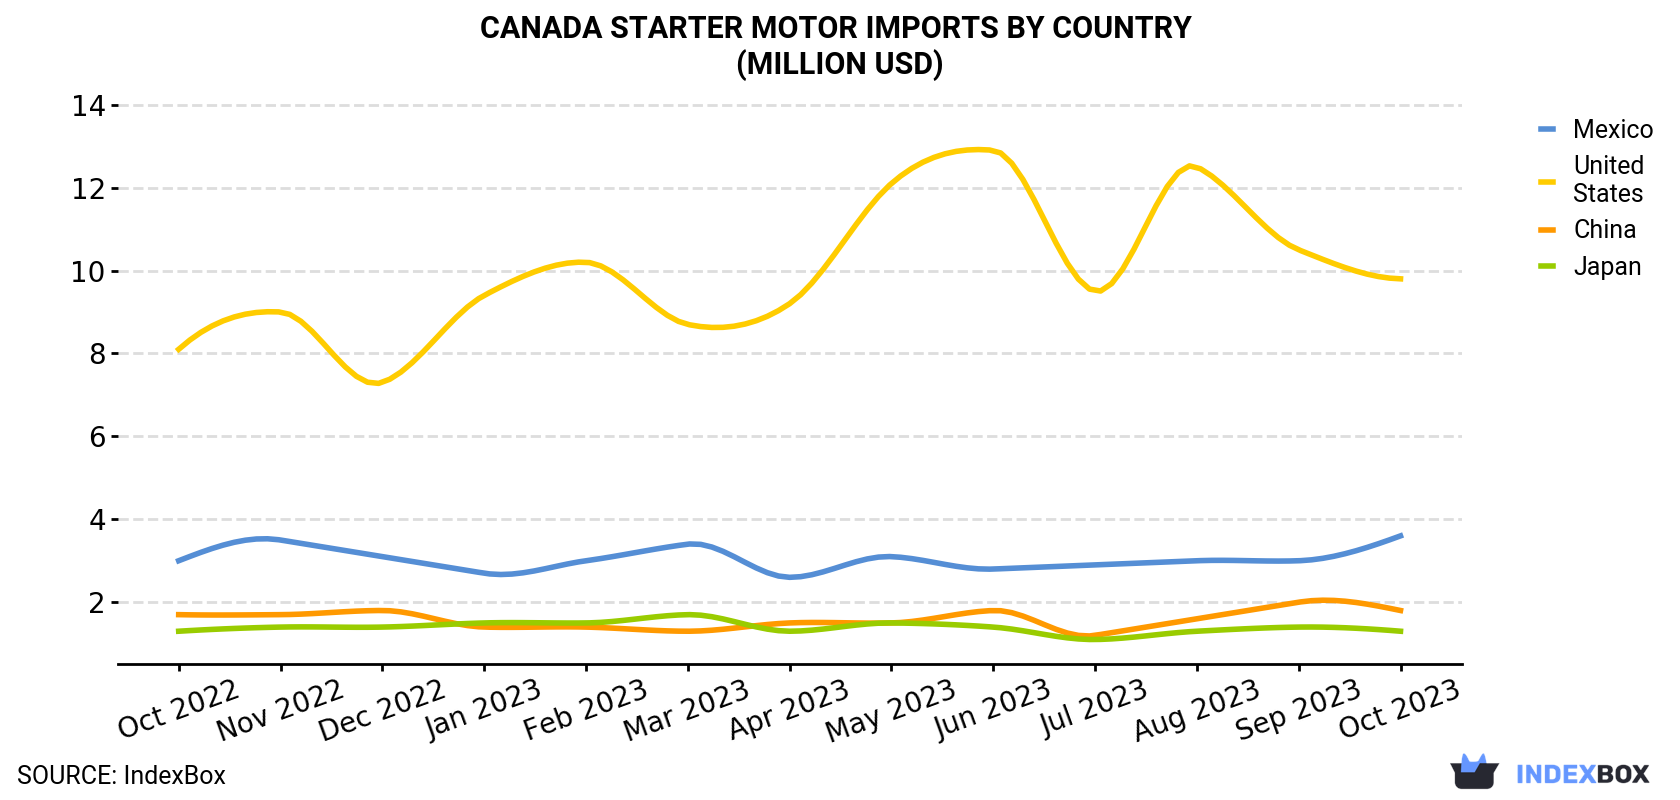 Canada Starter Motor Imports By Country (Million USD)